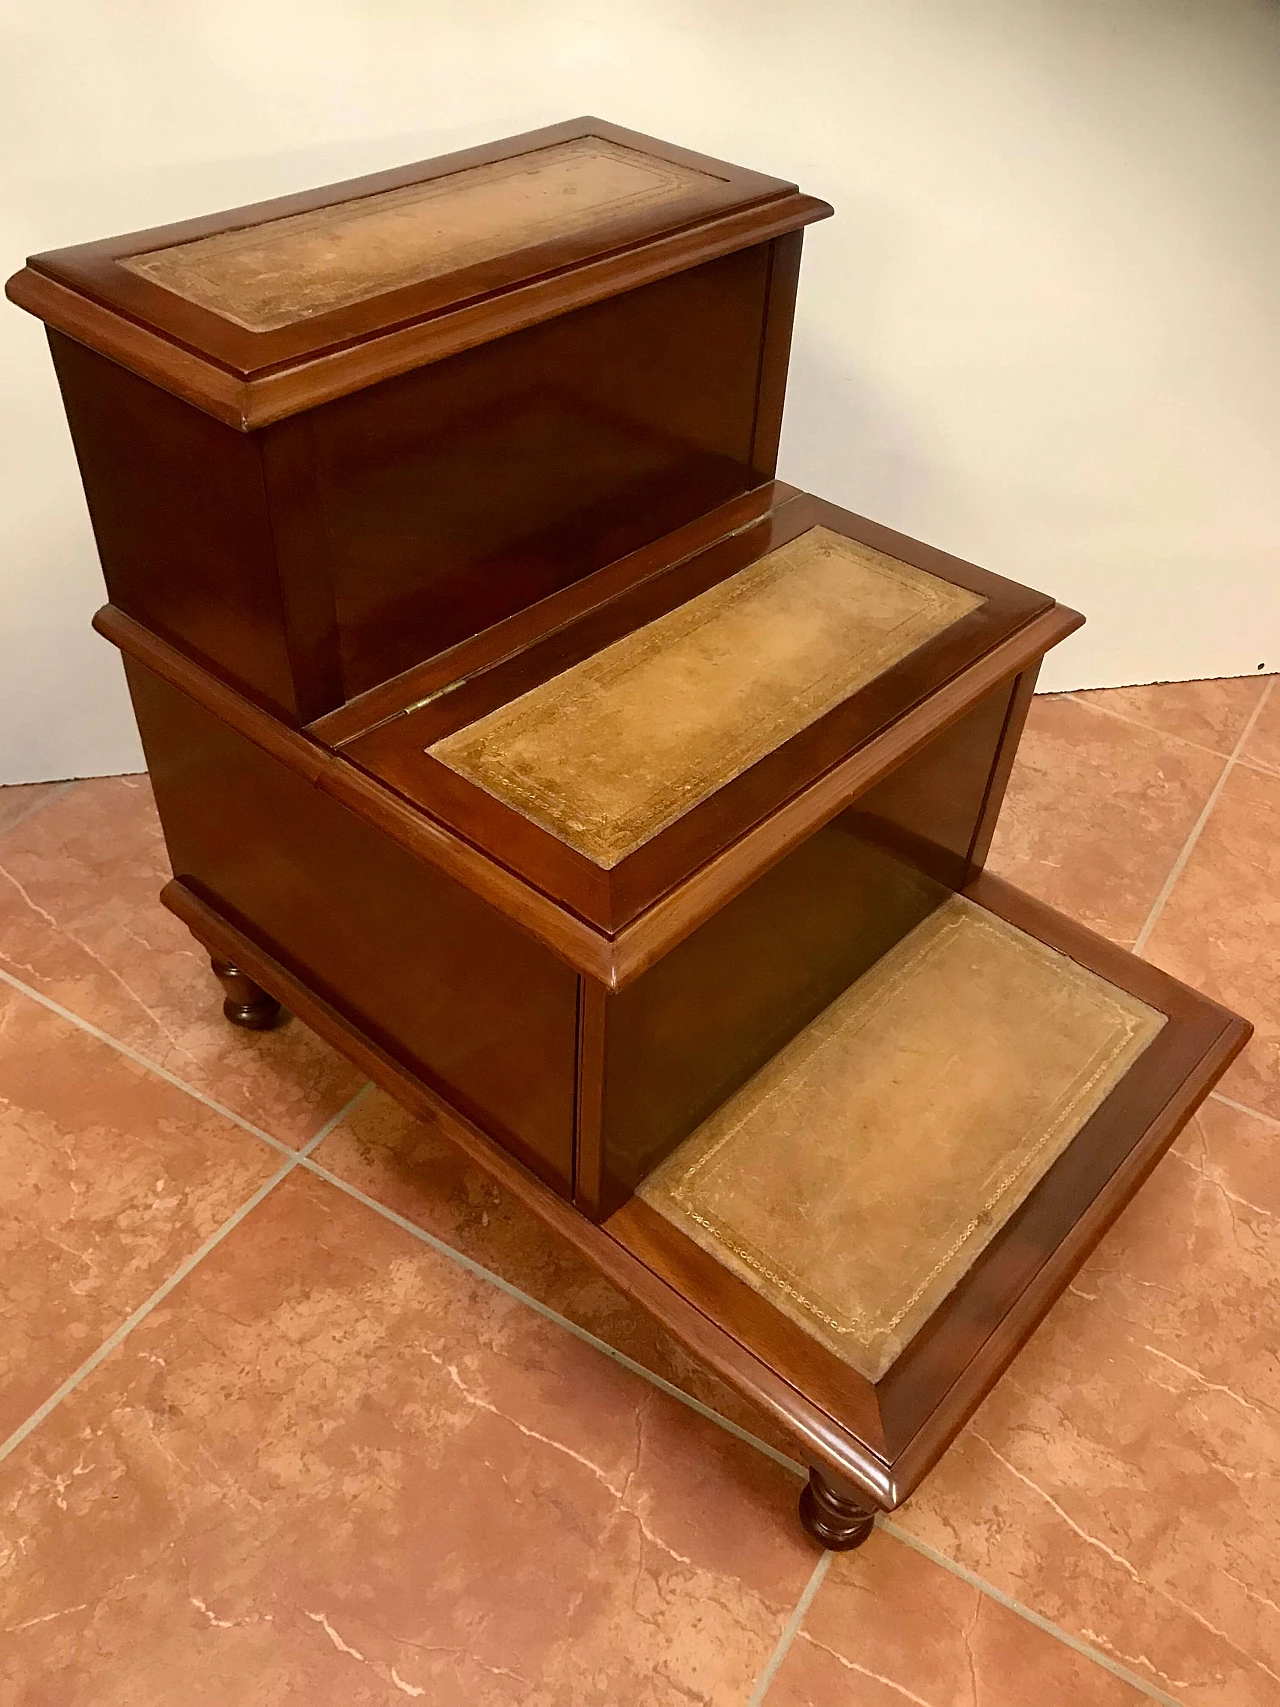 3 steps library ladder in mahogany and leather with 2 compartments, 19th century 1251617